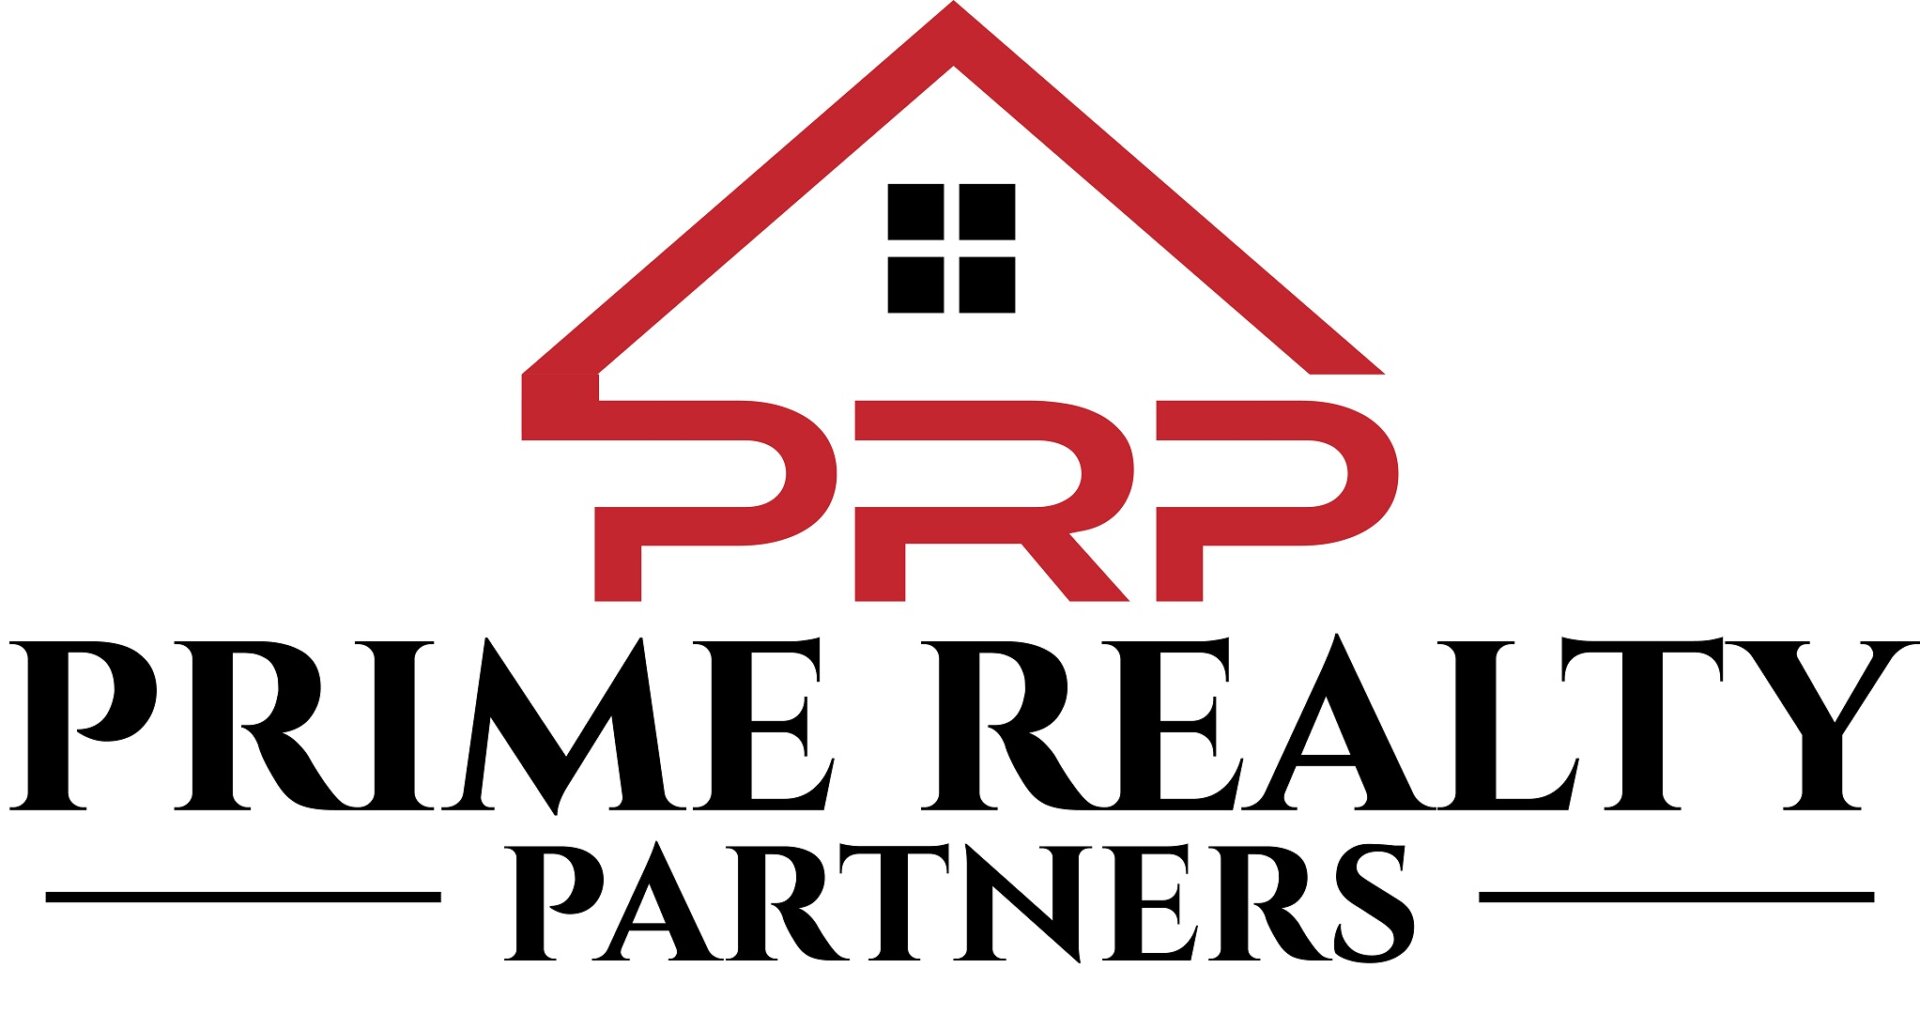 Prime Realty Partners